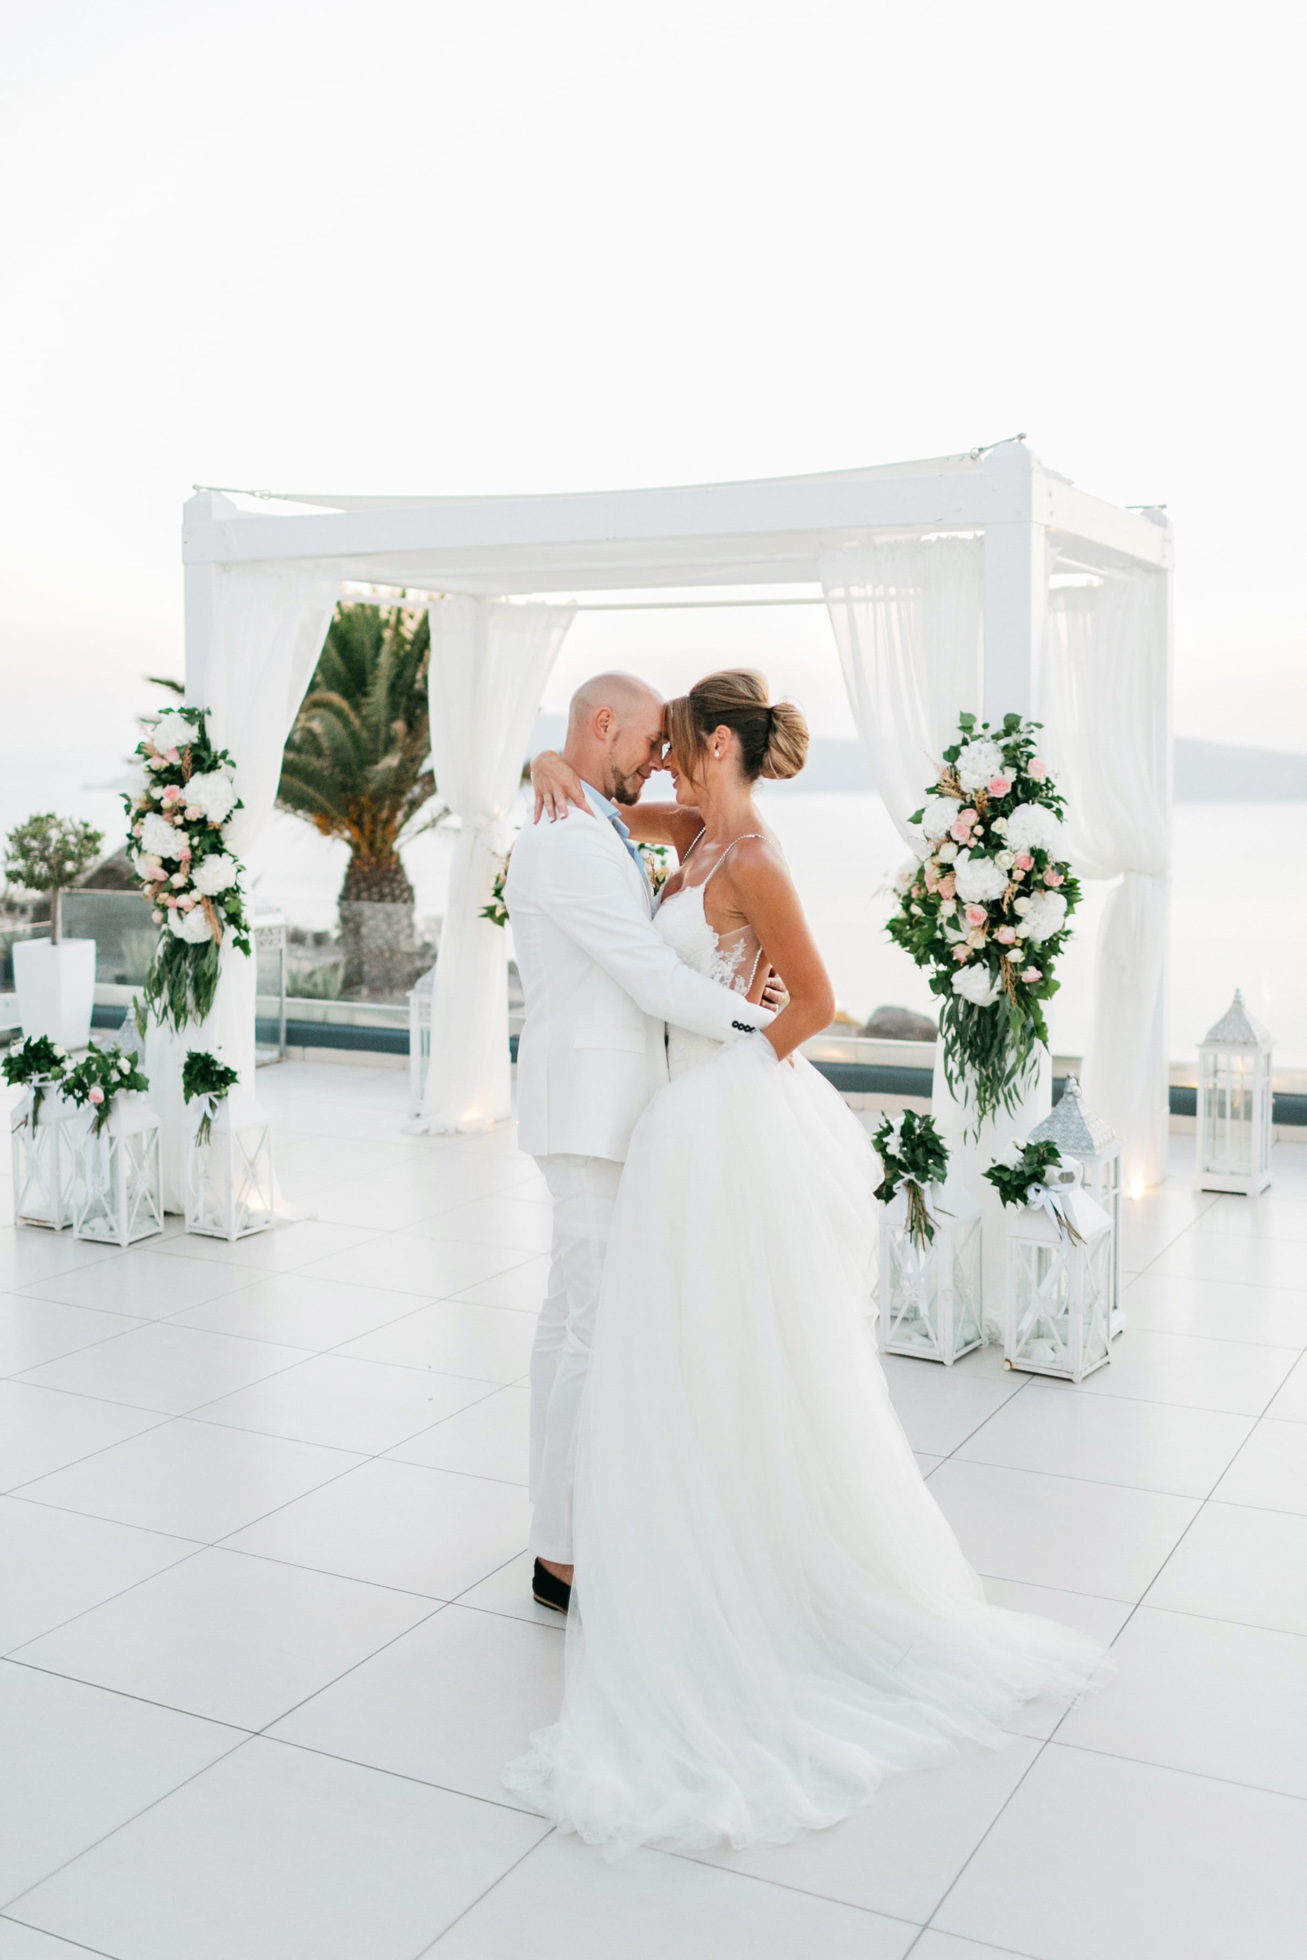 Bride and groom posing for their sunset wedding day portraits at Le Ciel wedding estate in Santorini island, Greece.